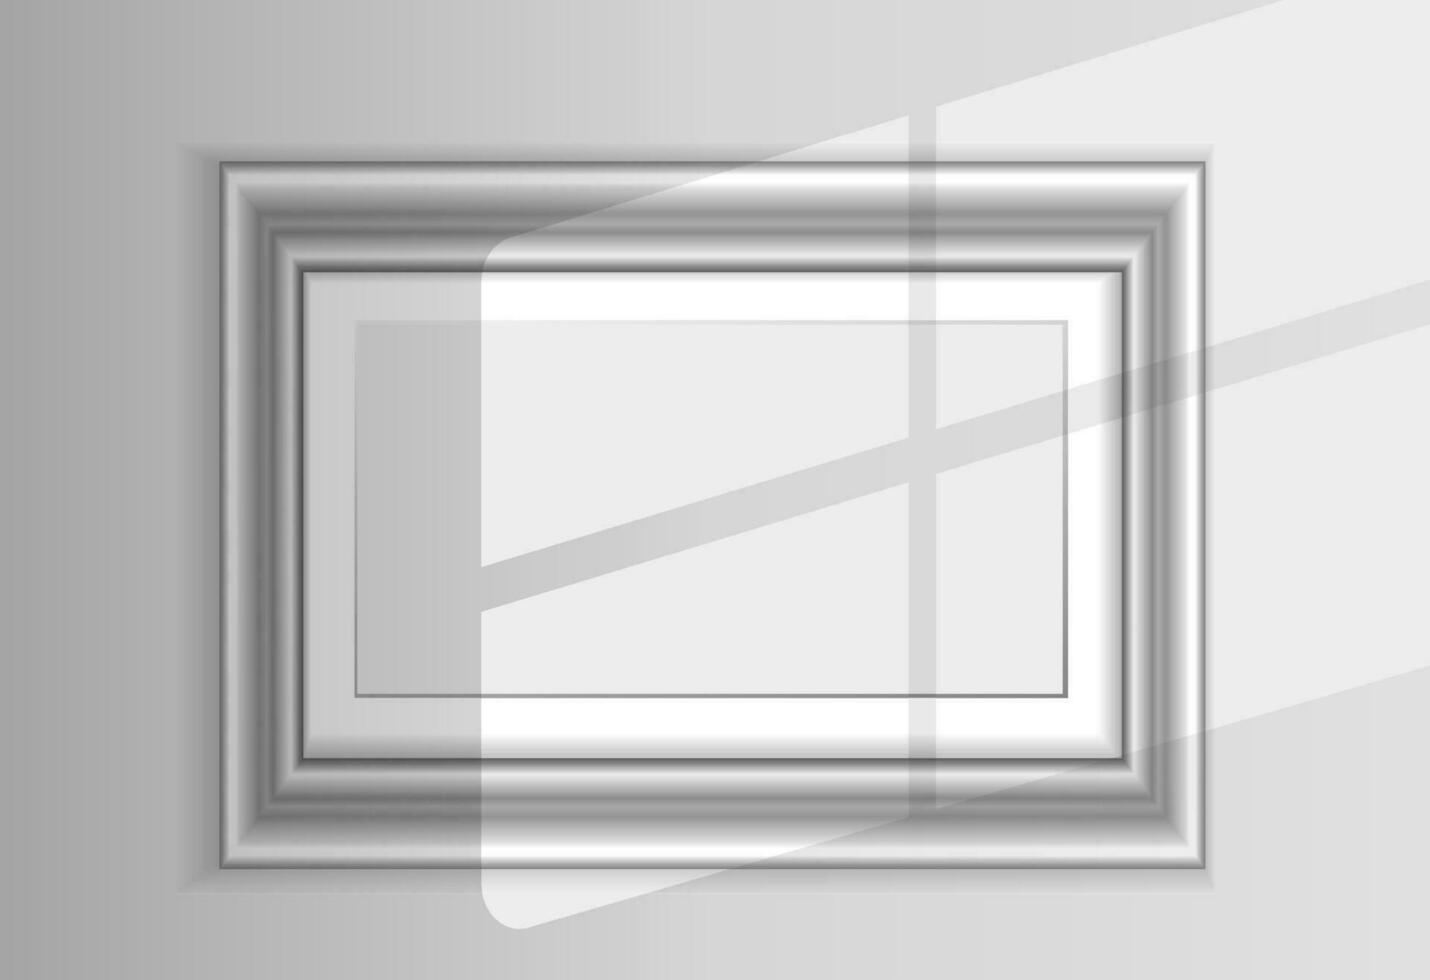 Mockup silver frame photo on wall. Mock up artwork picture framed. Horizontal border with shadow, with shadow. Empty A4 photo frame. Modern stylish 3d. Design prints poster, letterhead, painting image vector